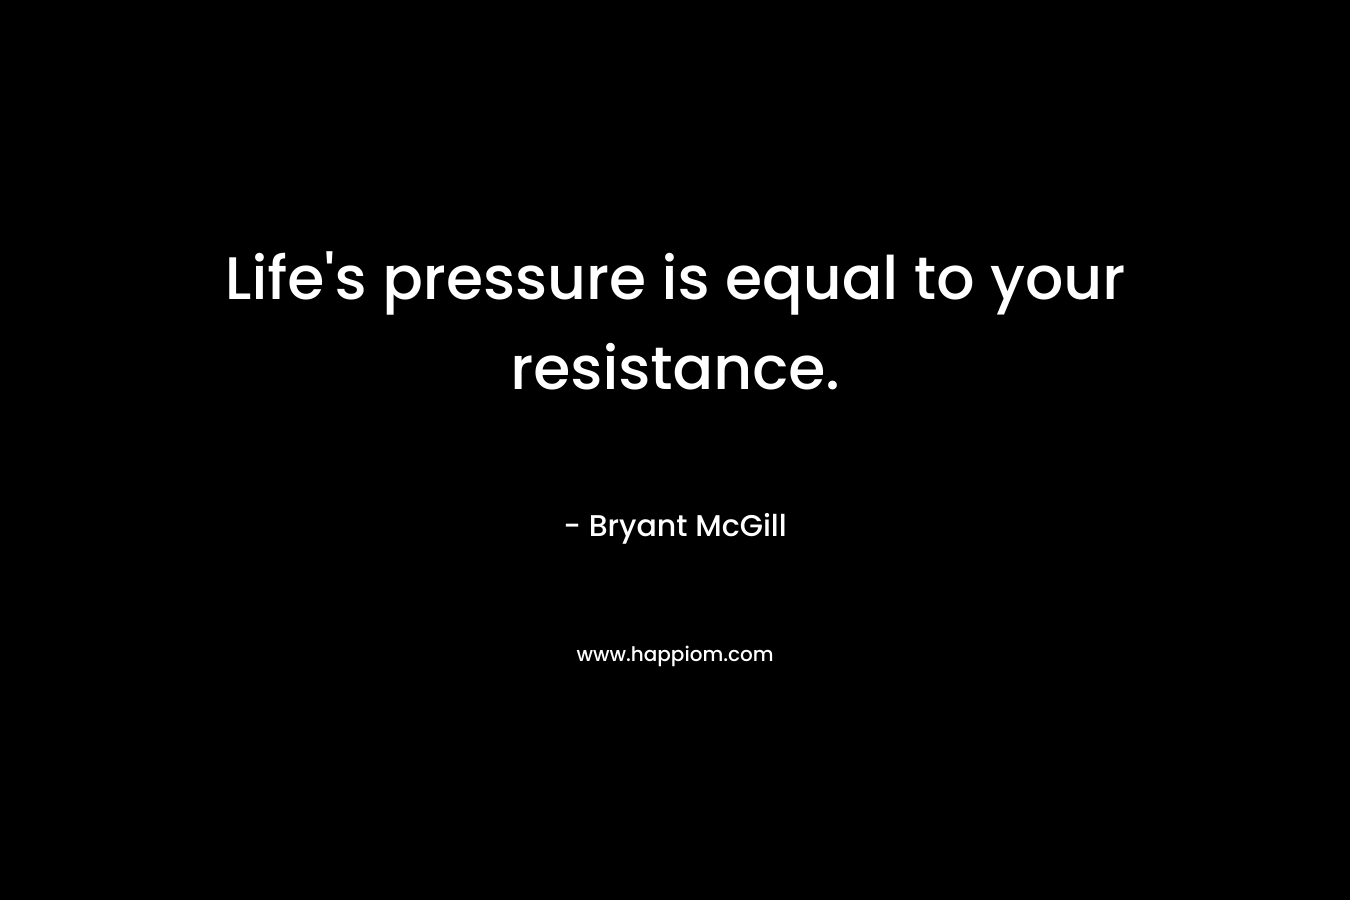 Life's pressure is equal to your resistance.